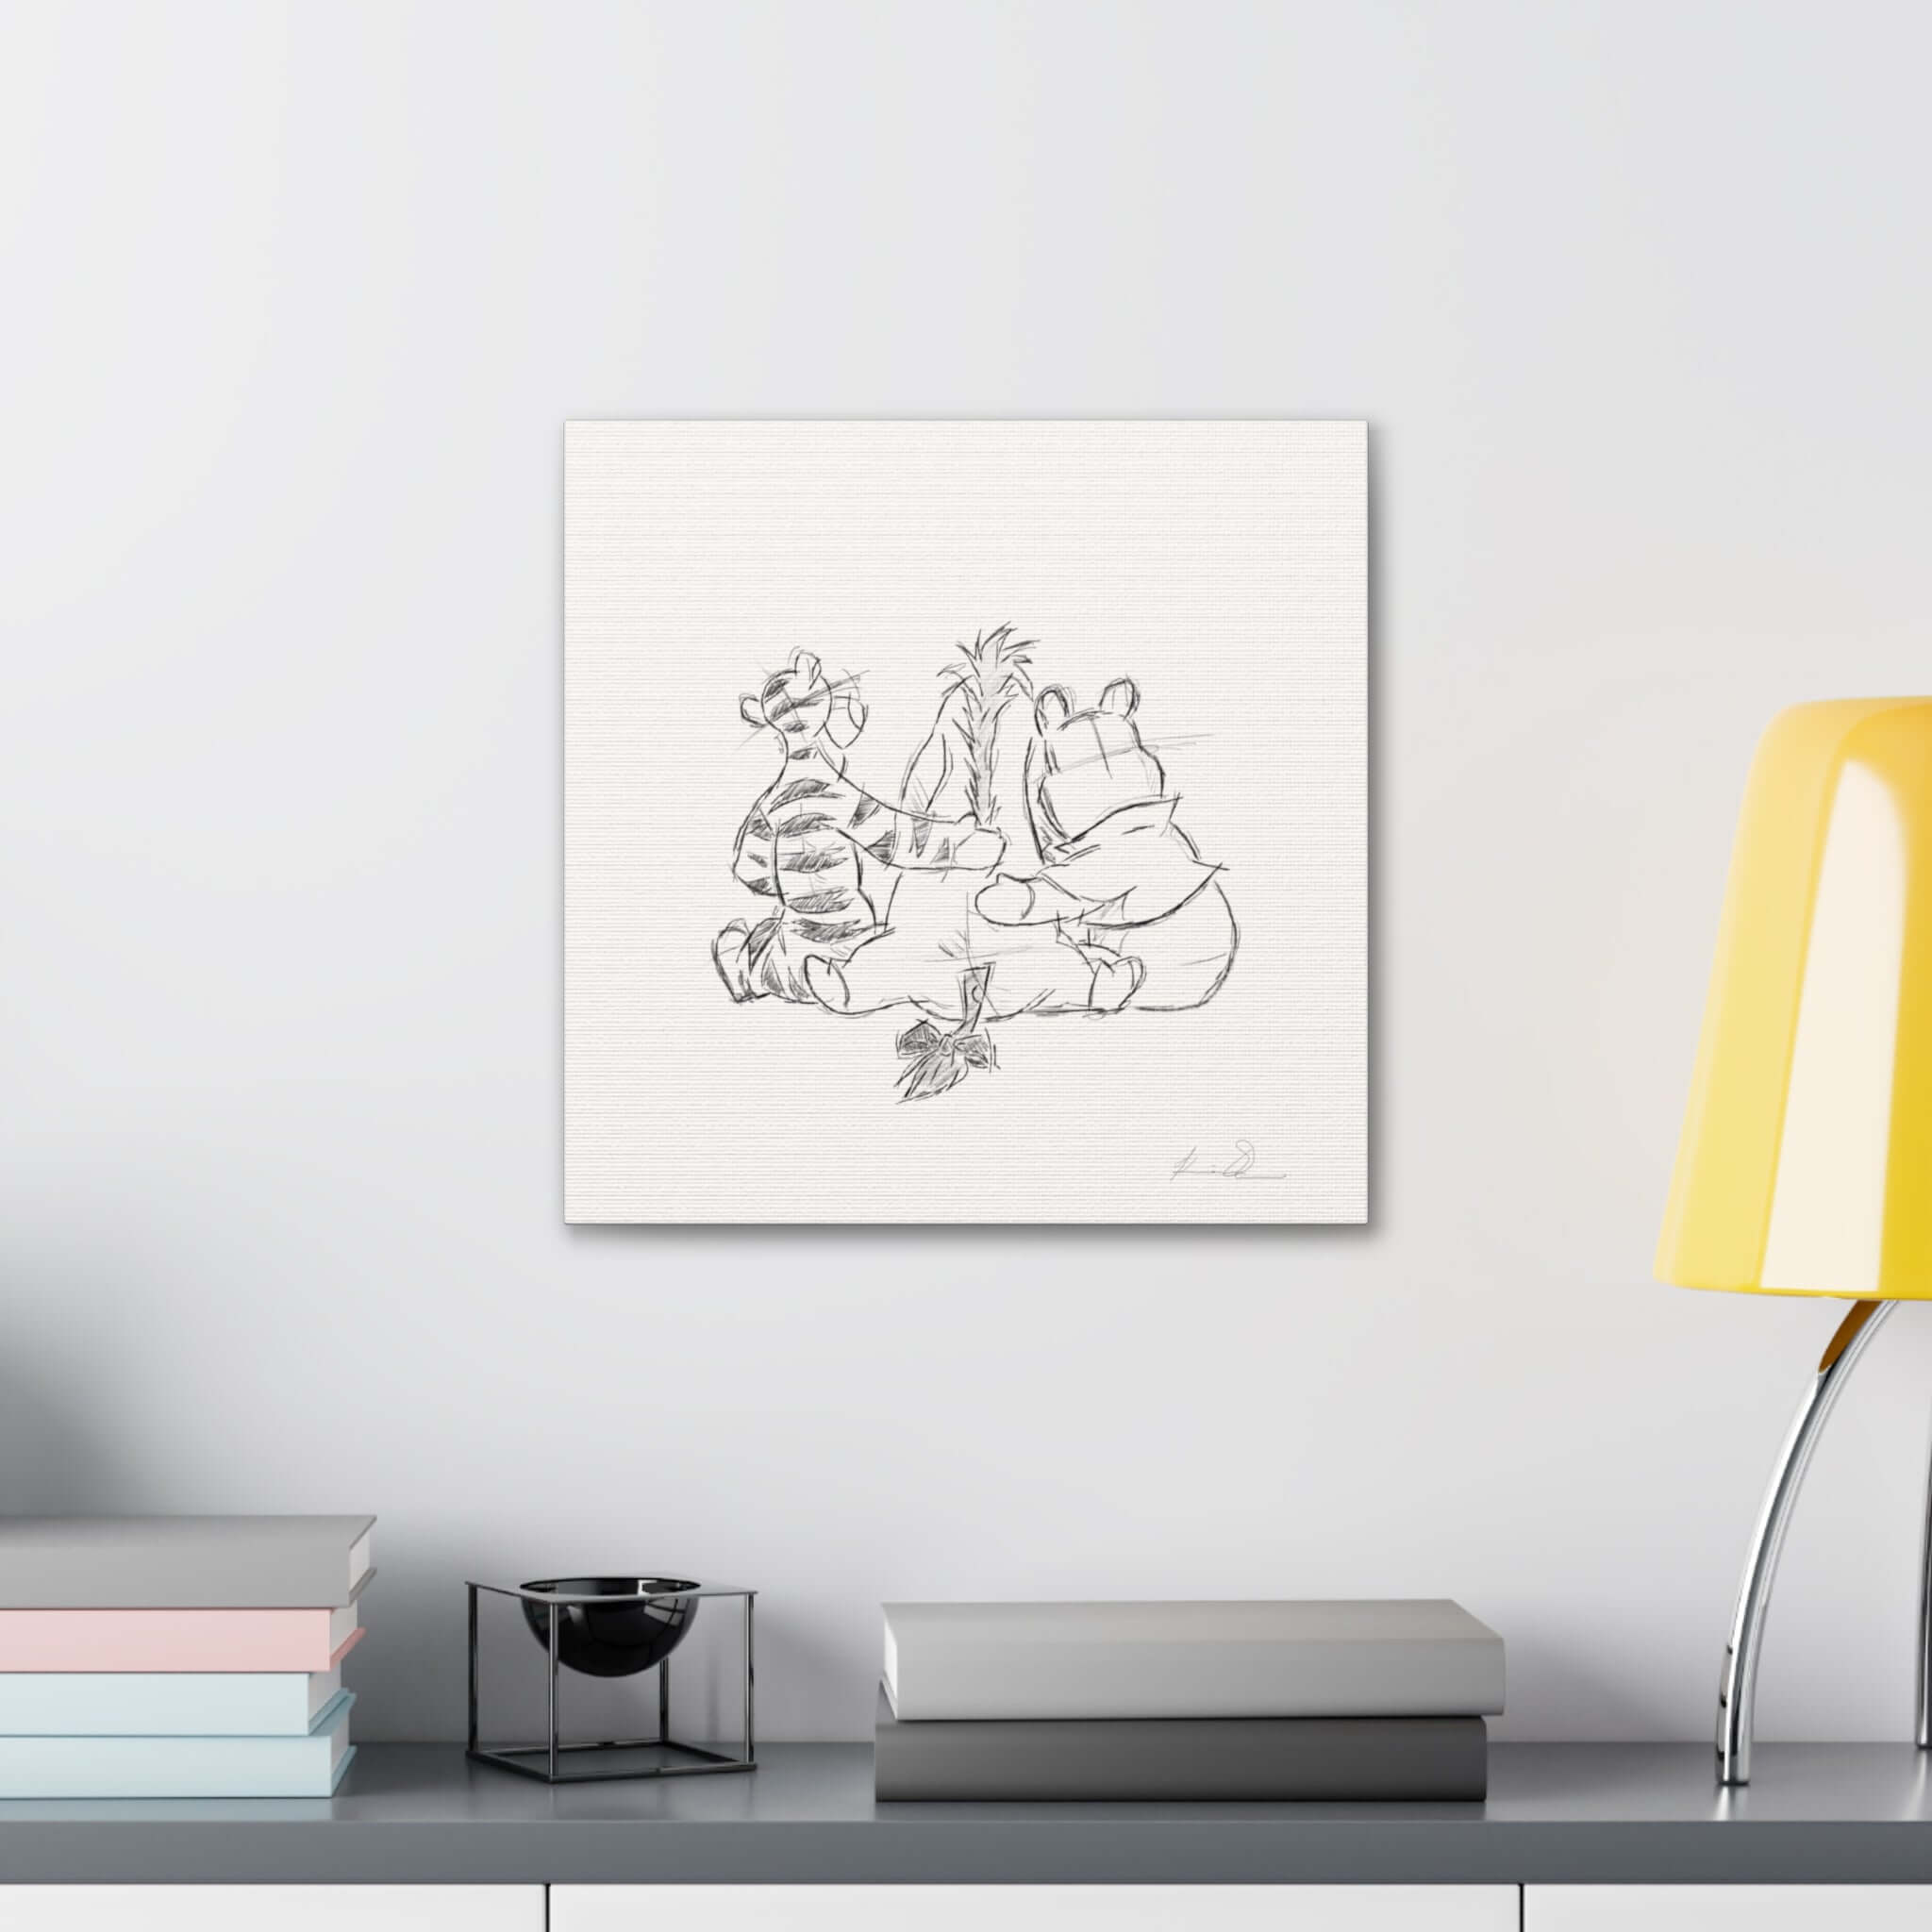 Sketch of two characters high-fiving, framed on a wall with a modern desk lamp and stacked books below.